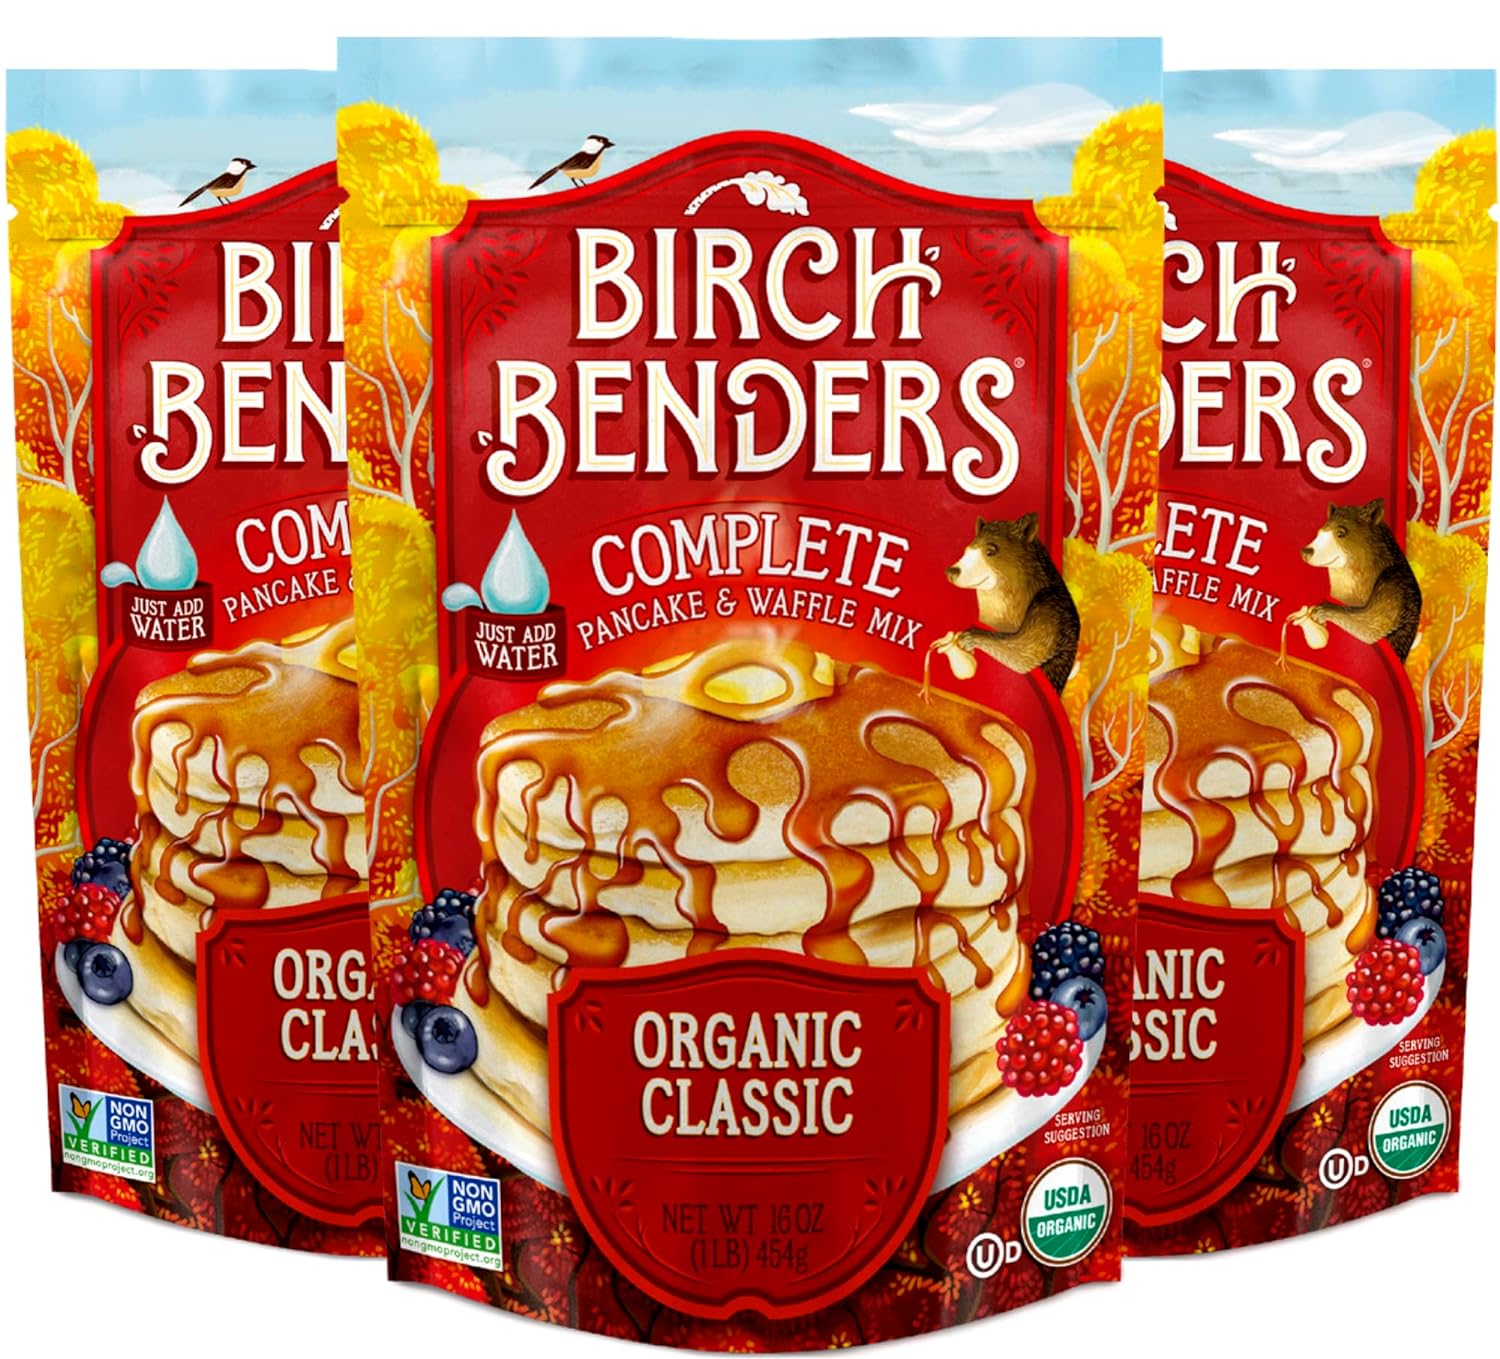 Birch Benders Organic Classic, Whole Grain, Pancake and Waffle Mix, 16 oz (Pack of 3)